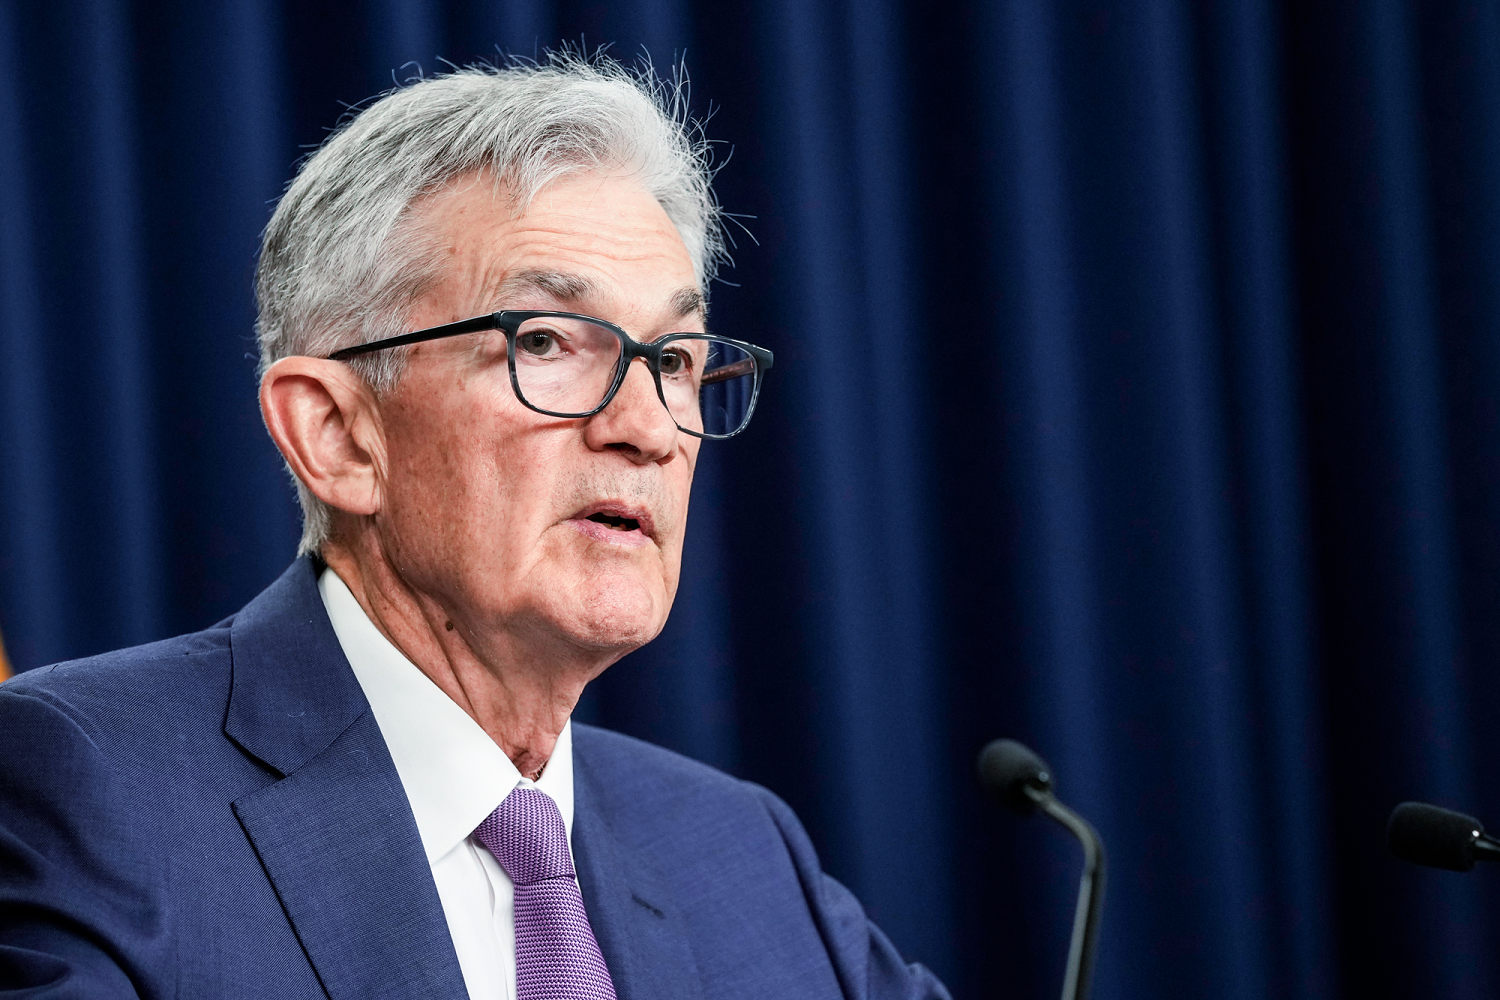 Fed chair Jerome Powell: No sign of stagflation in US economy